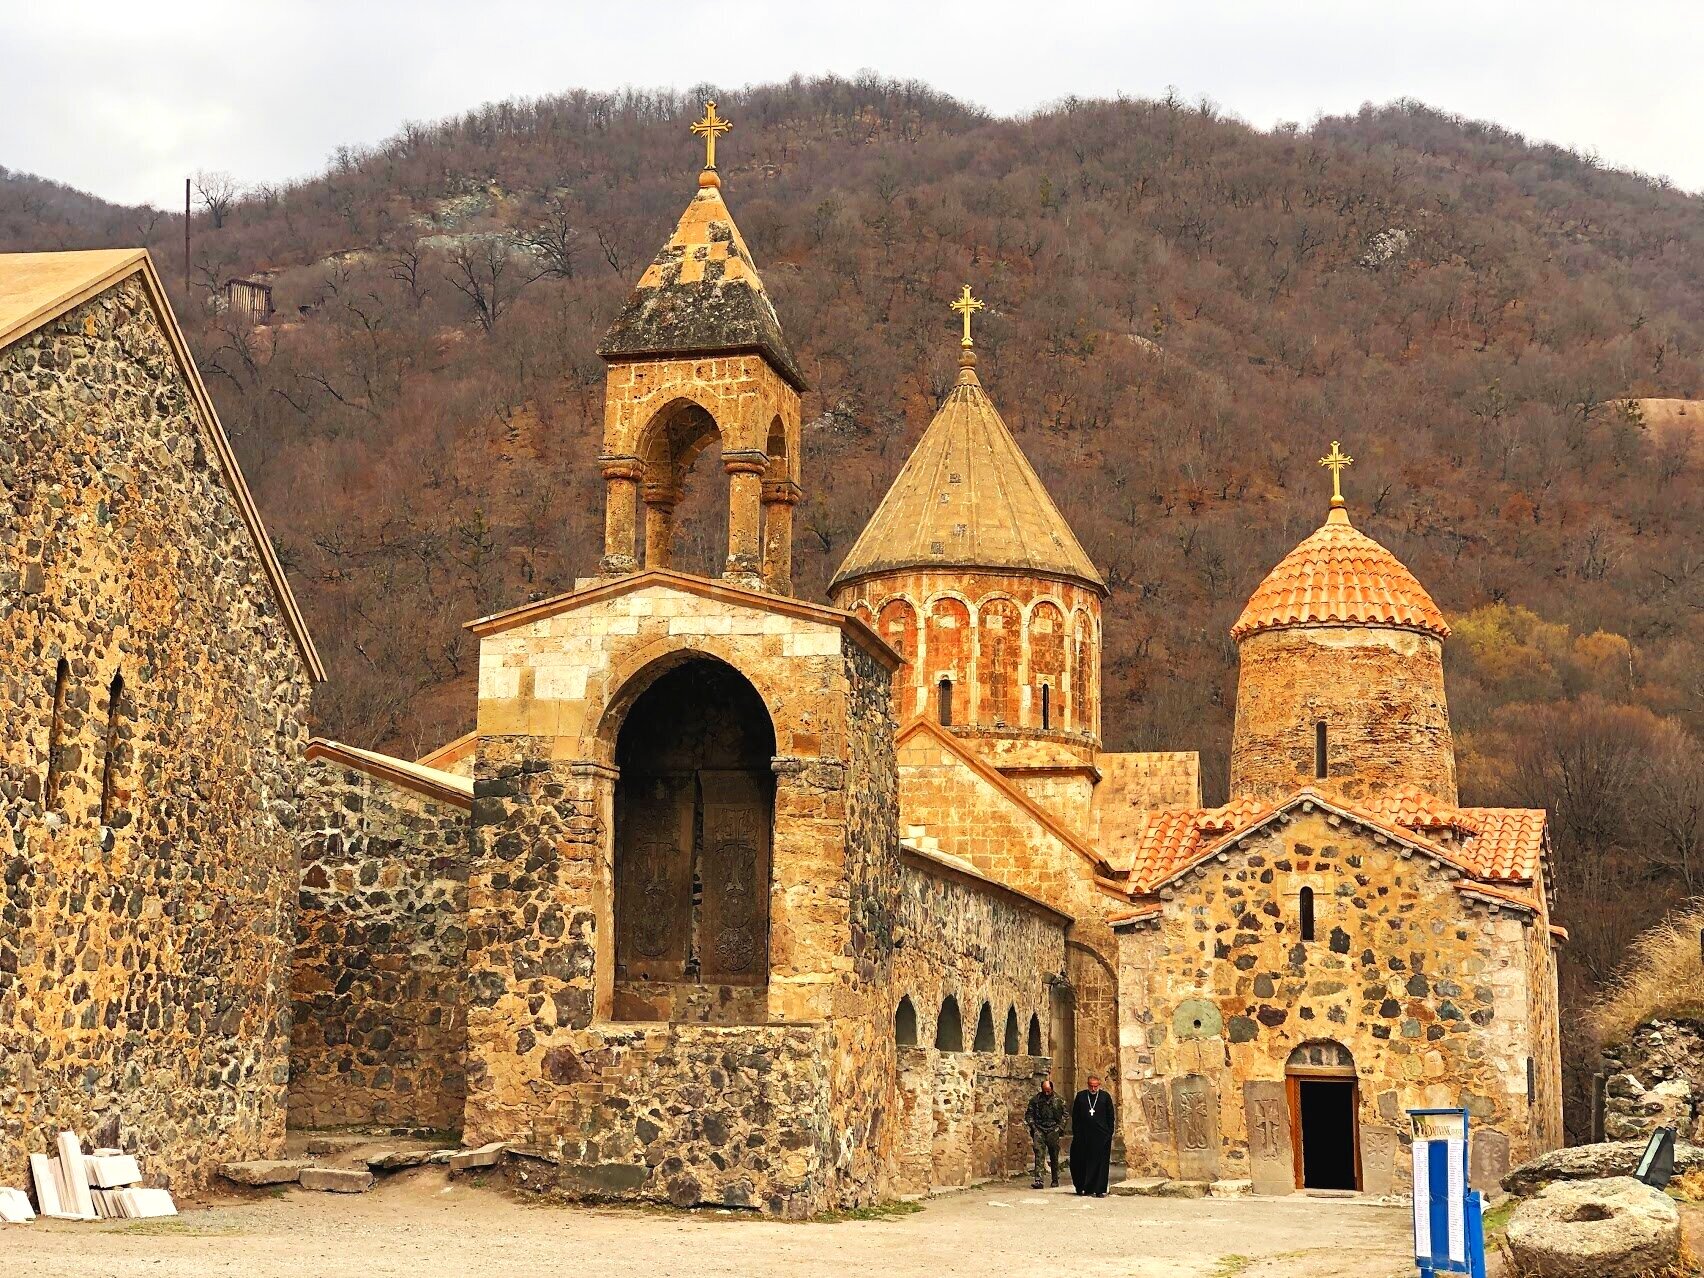 DAILY BEAST: Armenia Has Some of the World's Most Enchanting Monasteries